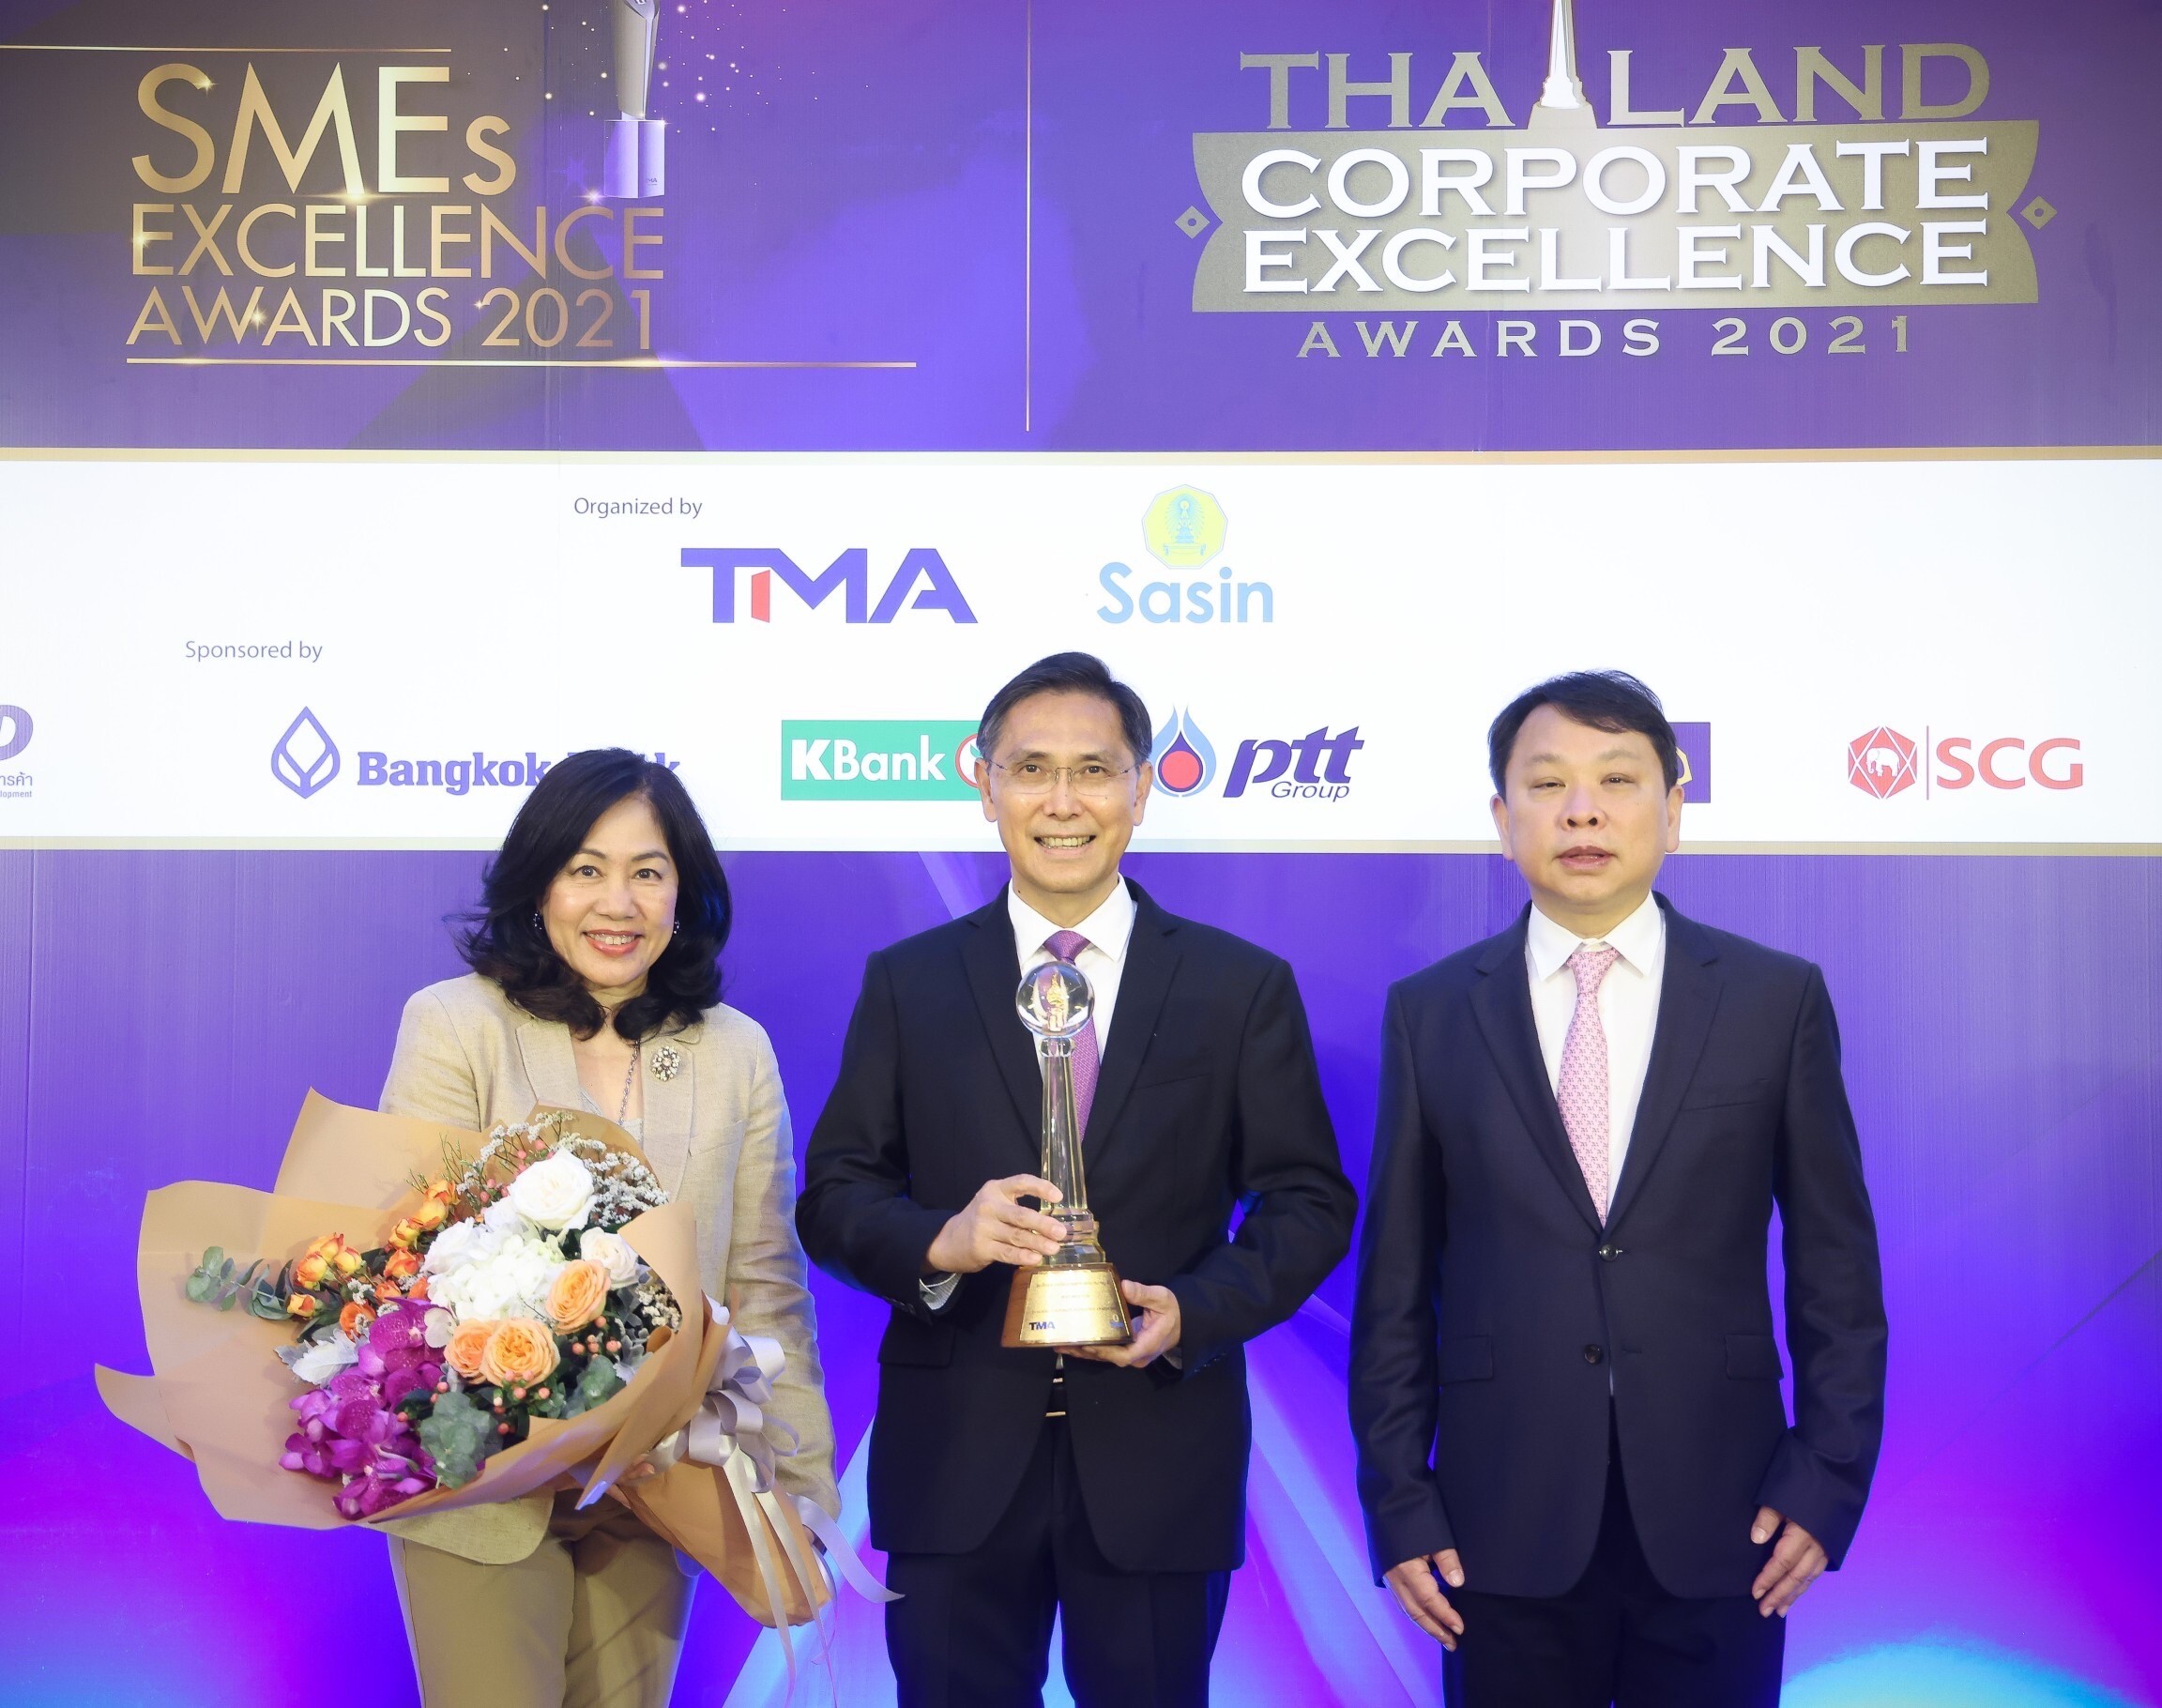 'Central Pattana' wins excellence awards in marketing, human resources, finance, project development and sustainability this year, reinforces its leadership as sustainable organization in every aspect